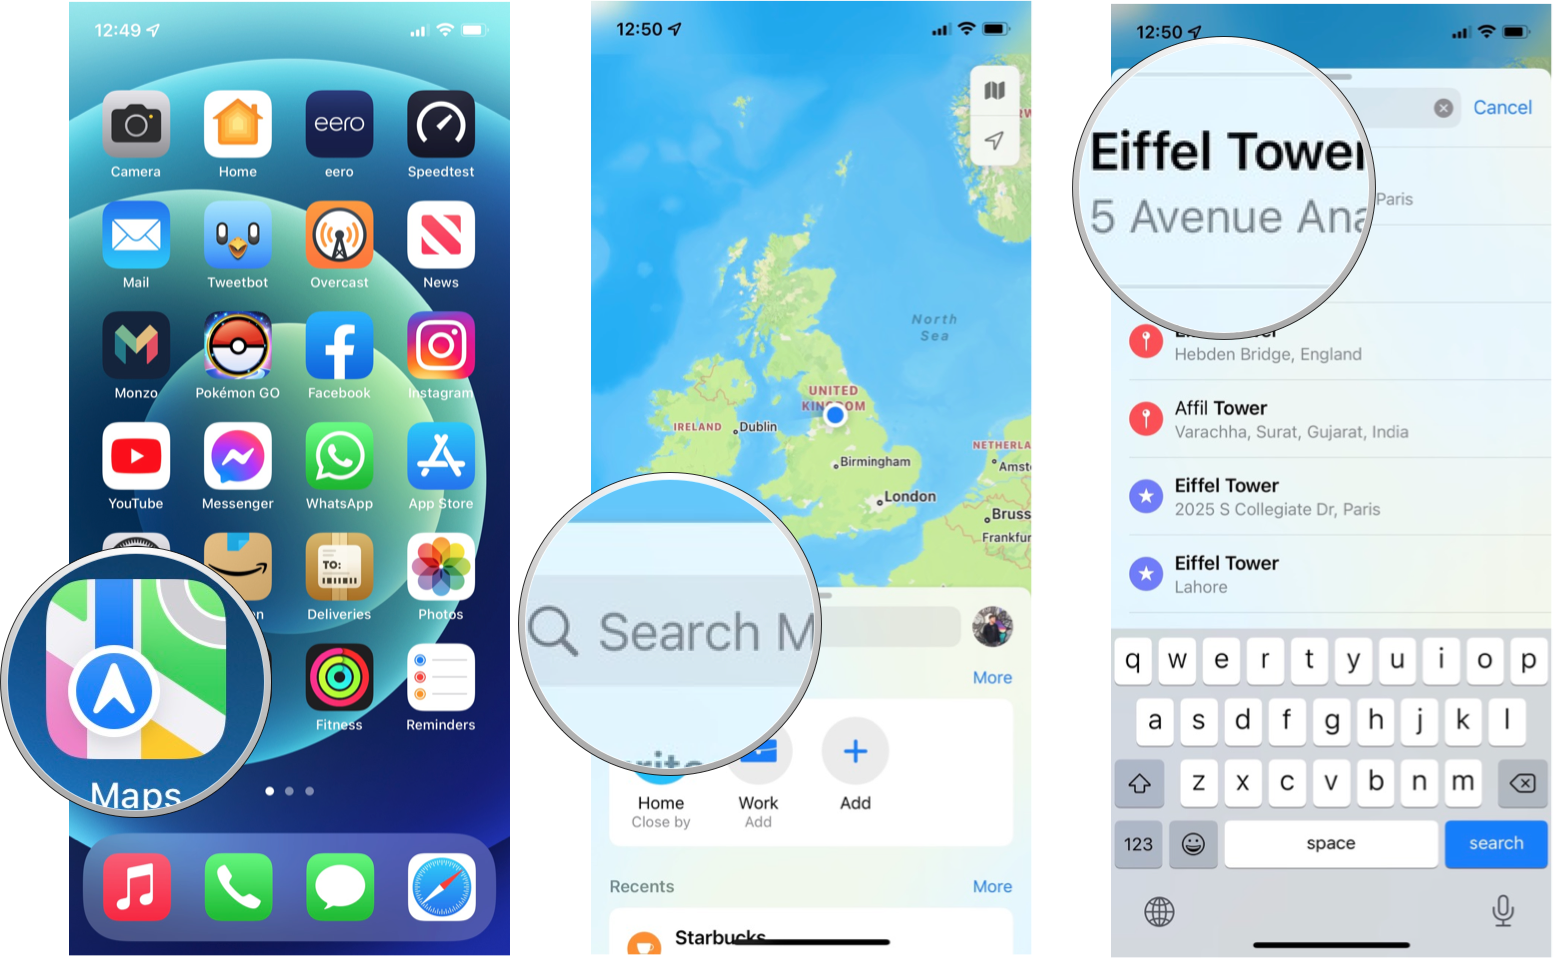 How To Use Flyover: Open Maps, tap the Search field and type in the location you wish to view, tap the correct result from the list of search results.